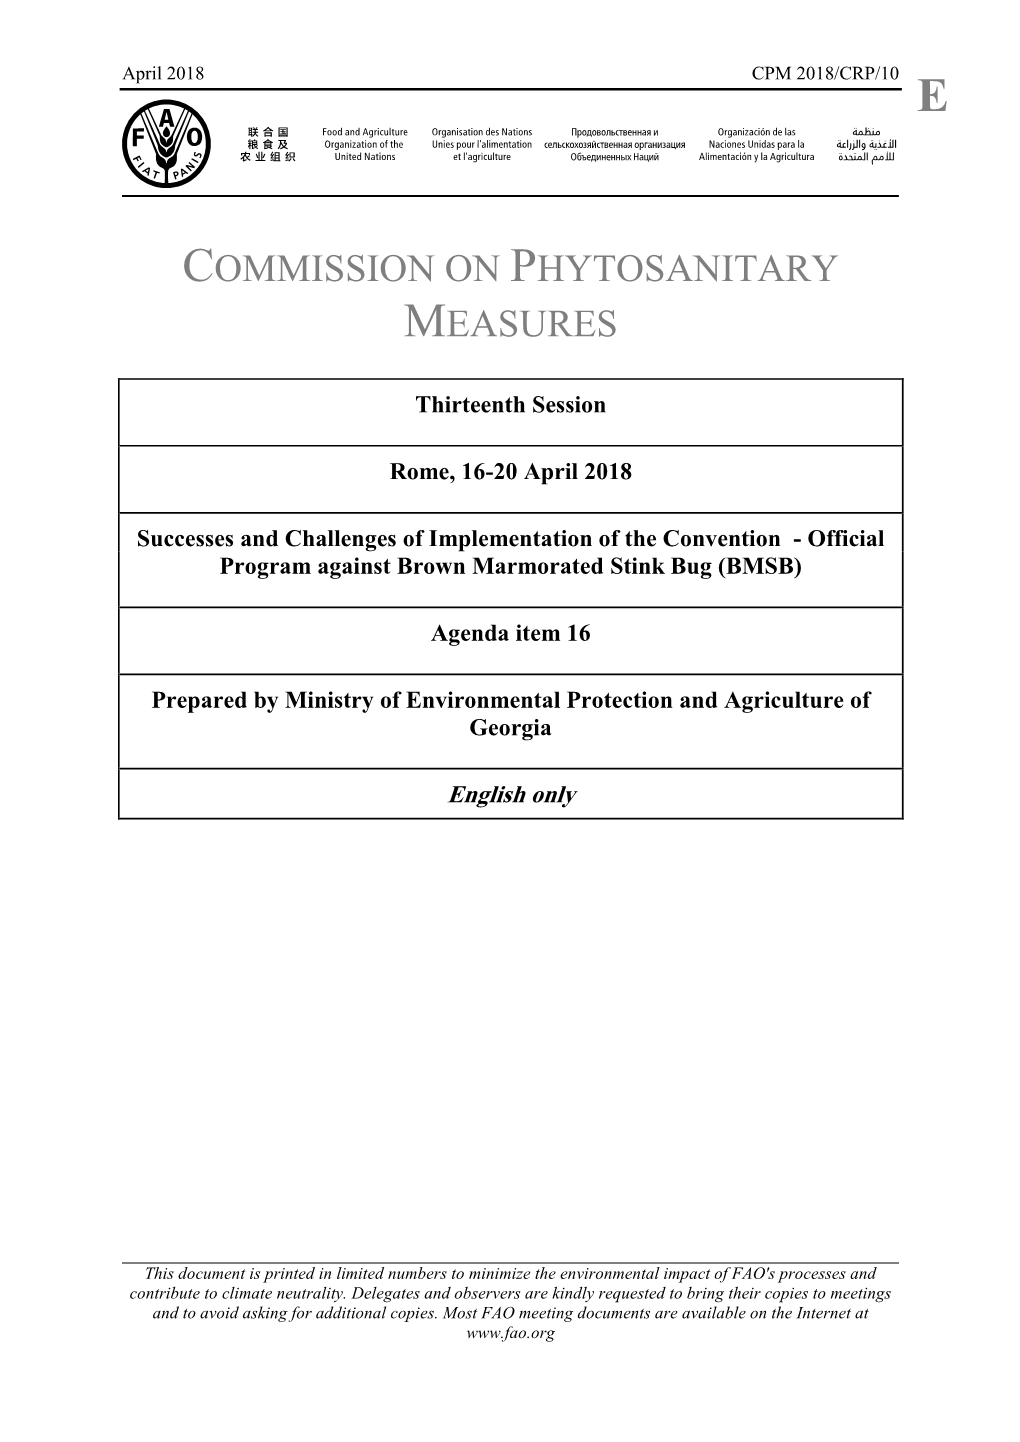 Commission on Phytosanitary Measures